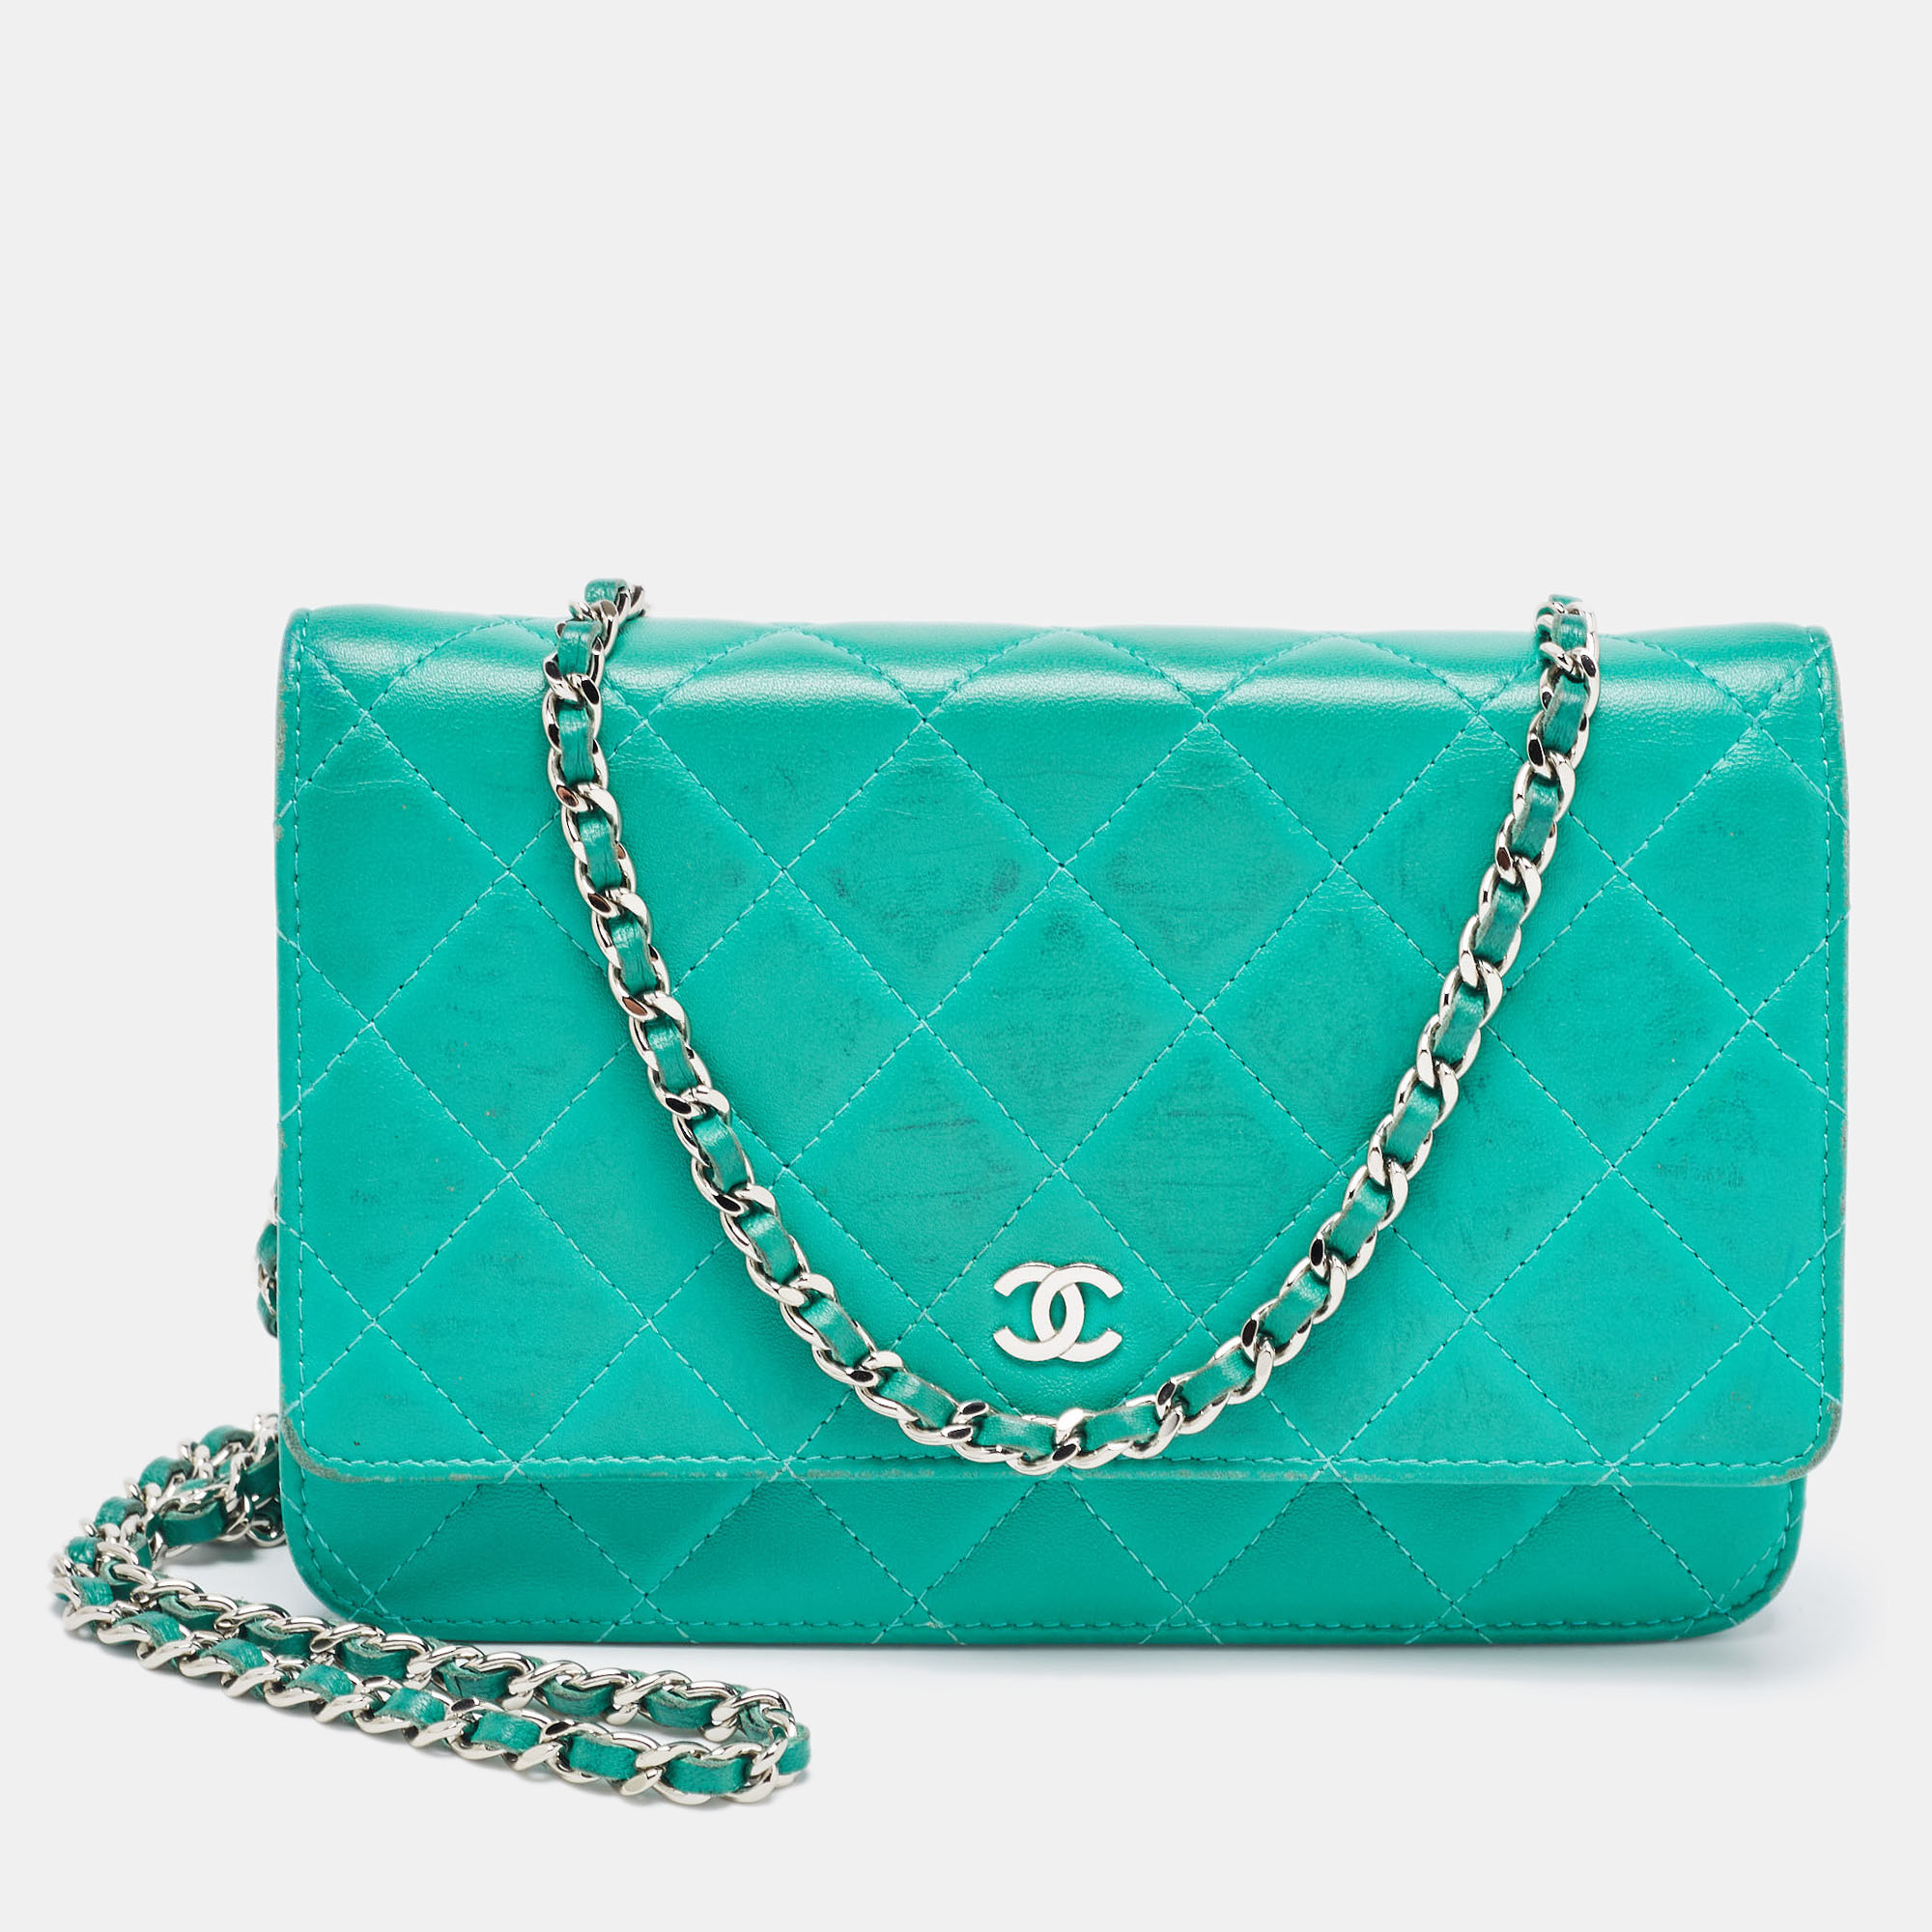 Pre-owned Chanel Green Leather Cc Wallet On Chain